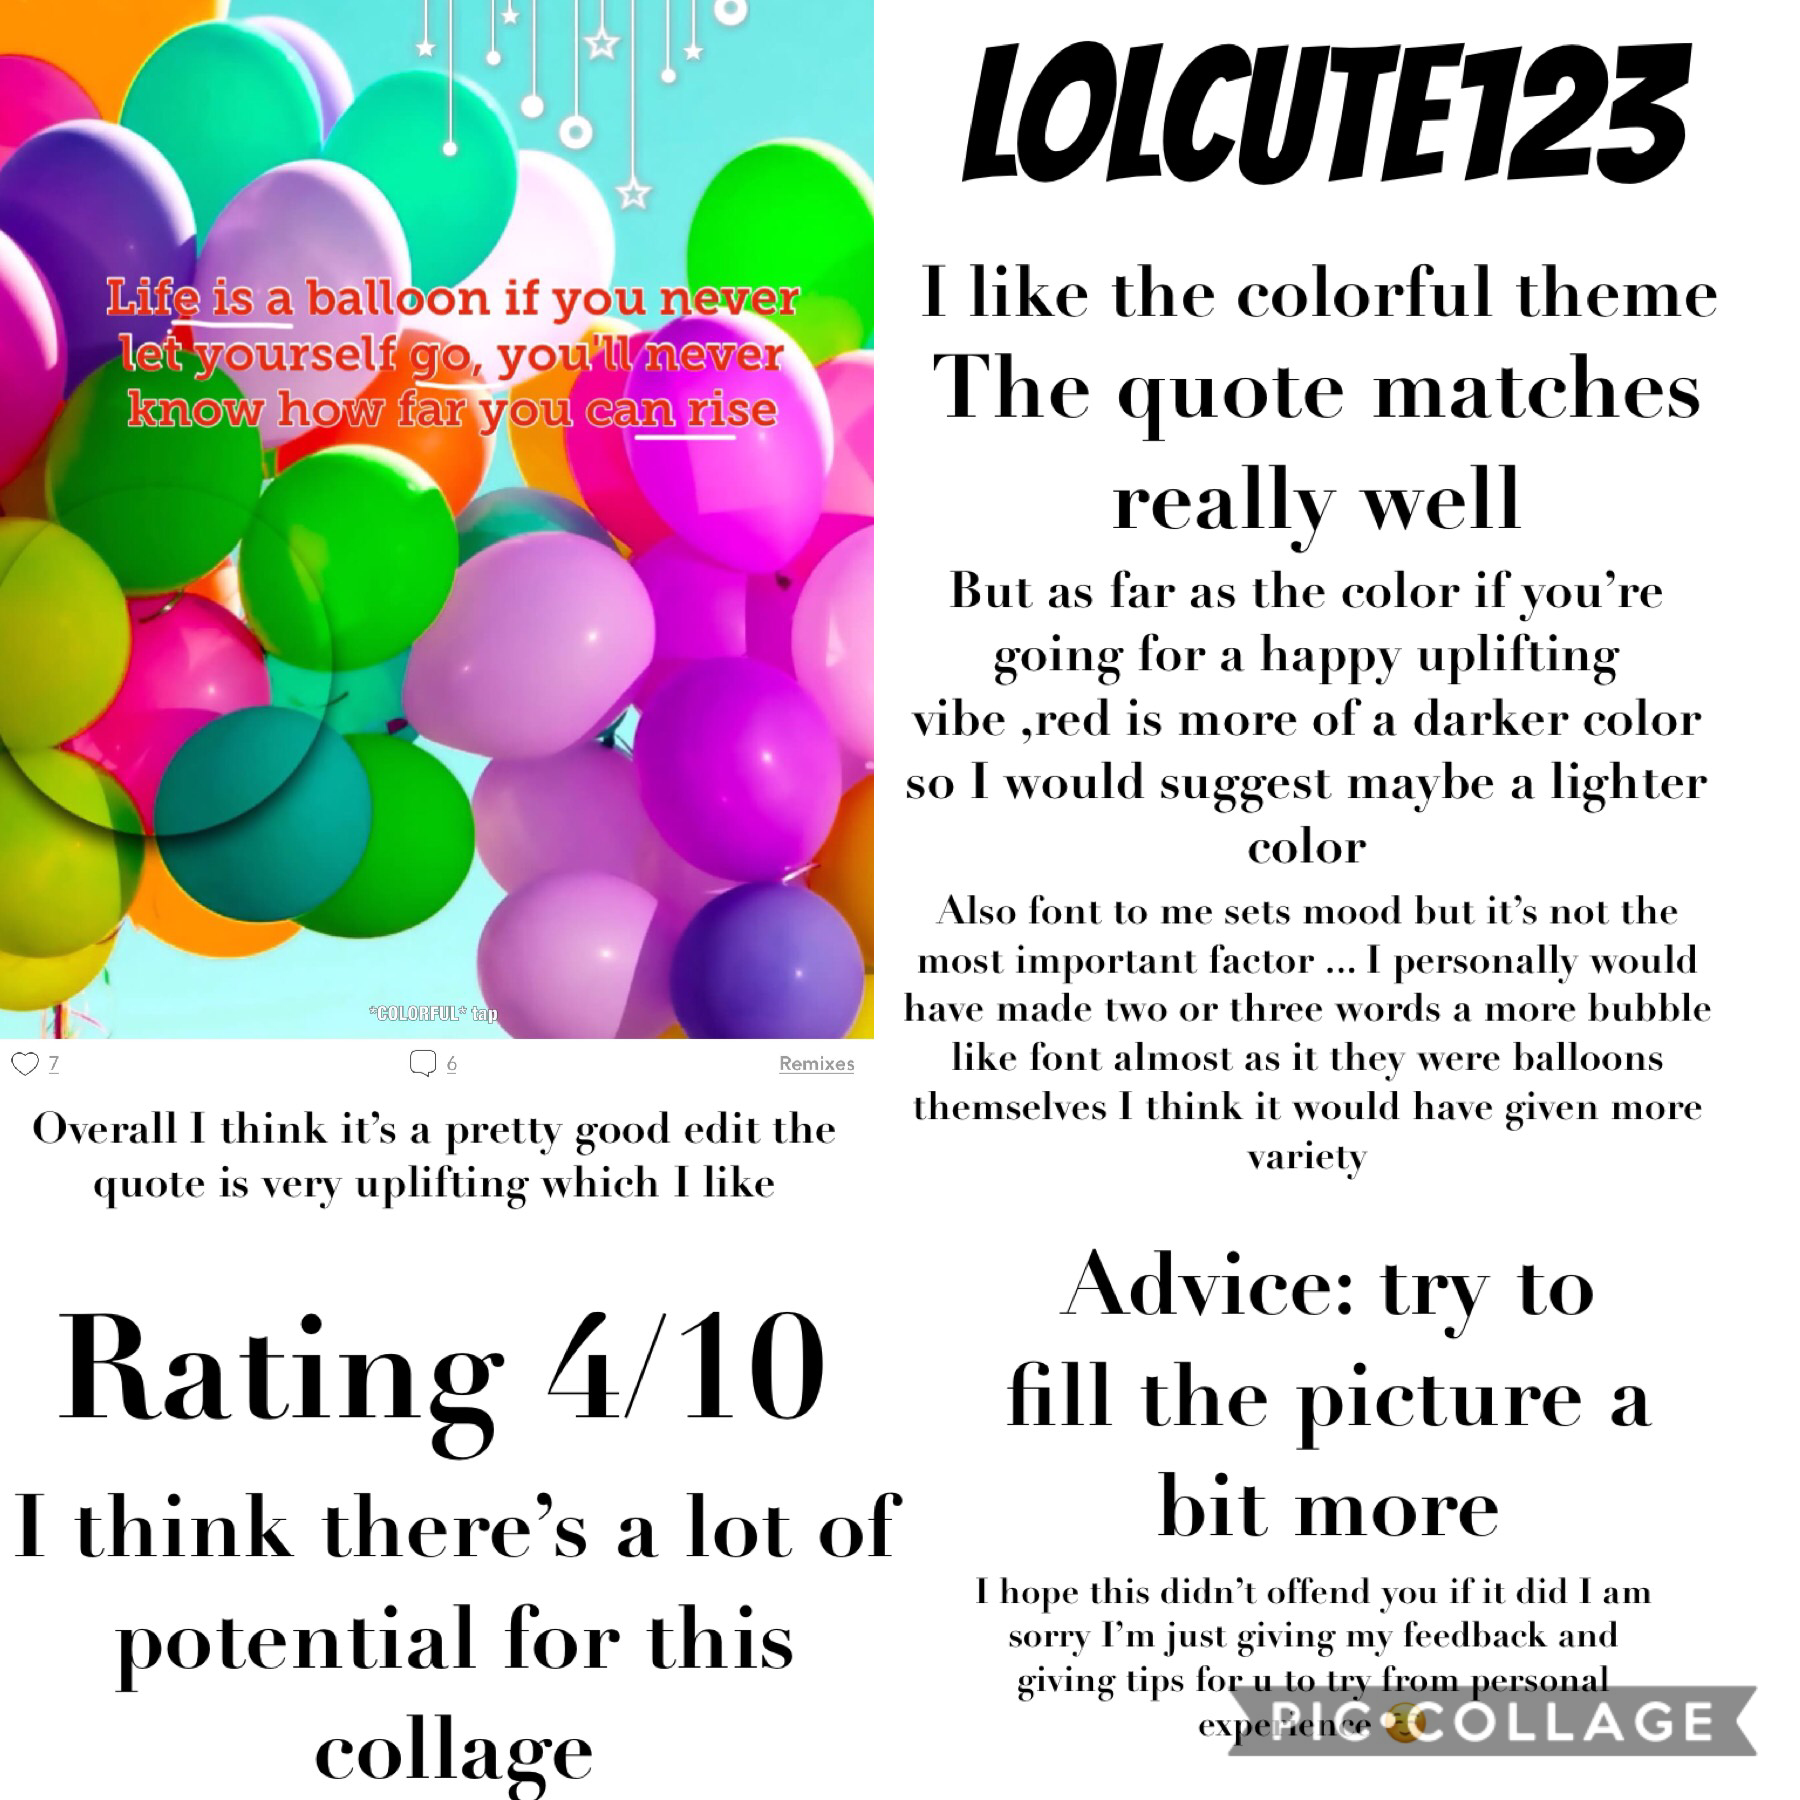 Shout out to lolcute123!